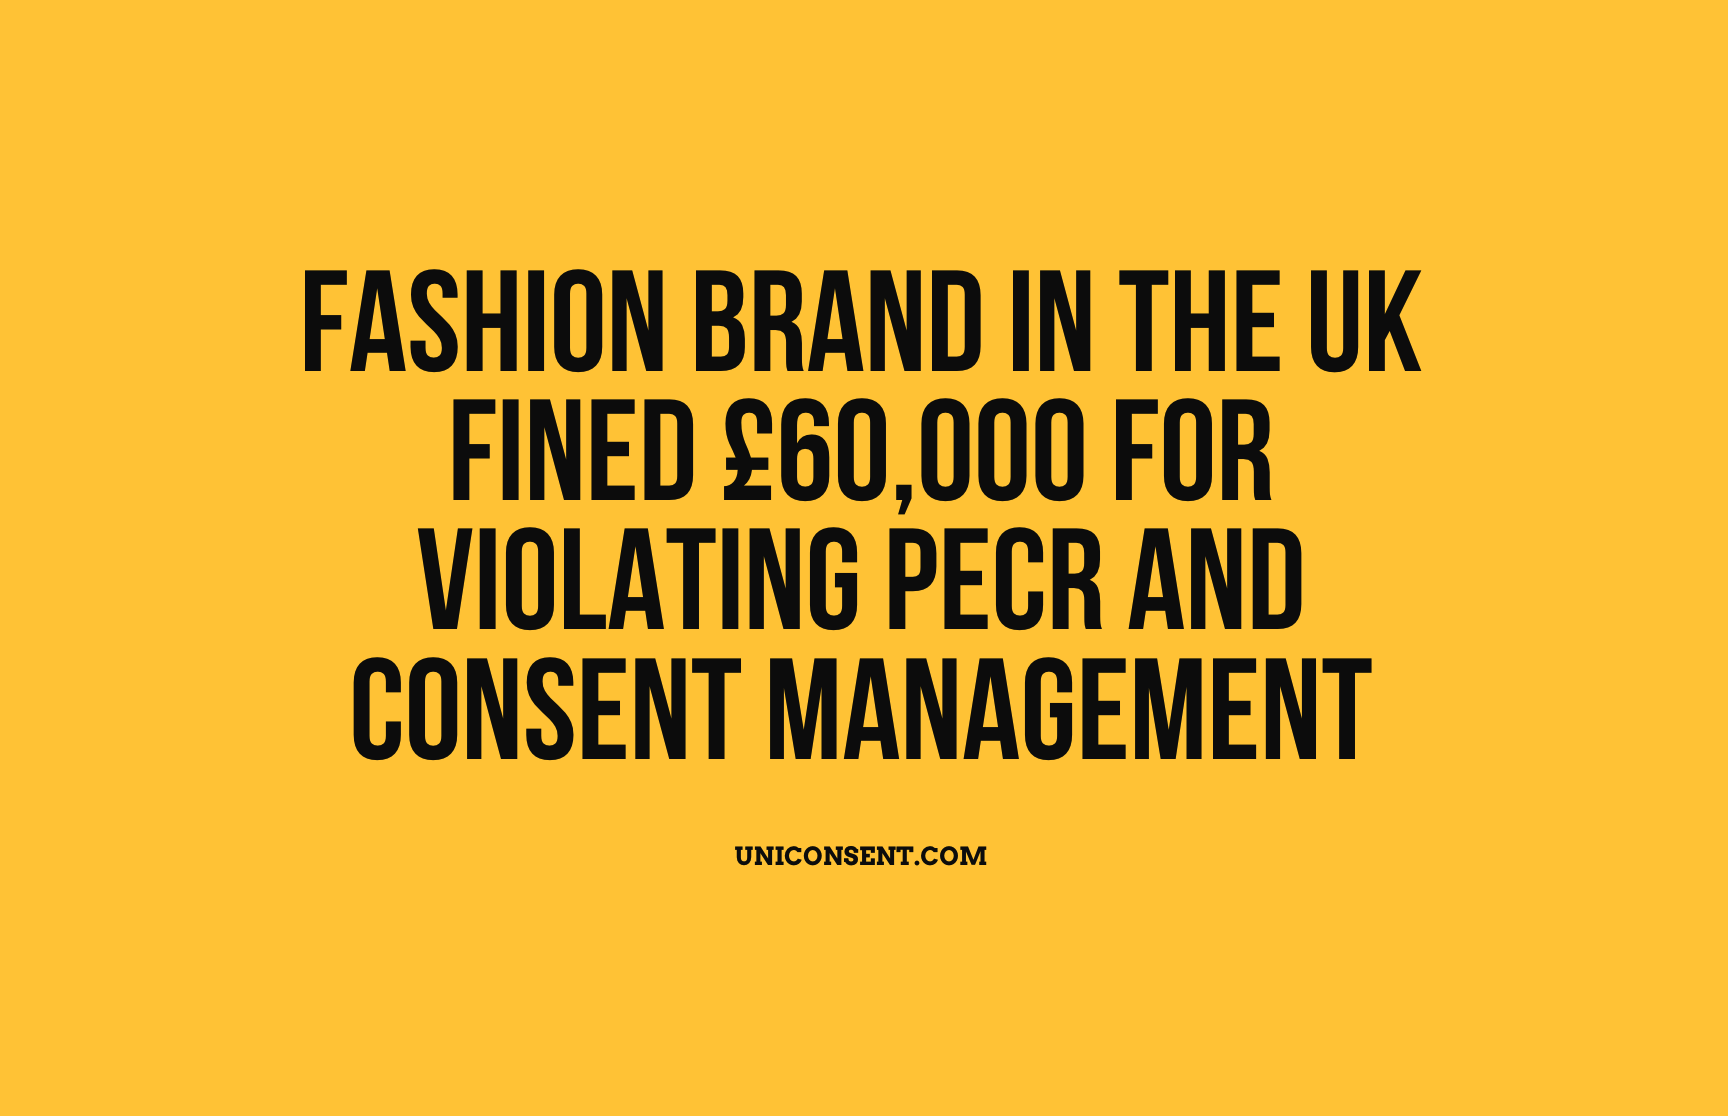 Fashion brand in the UK fined £60,000 for violating PECR and Consent Management